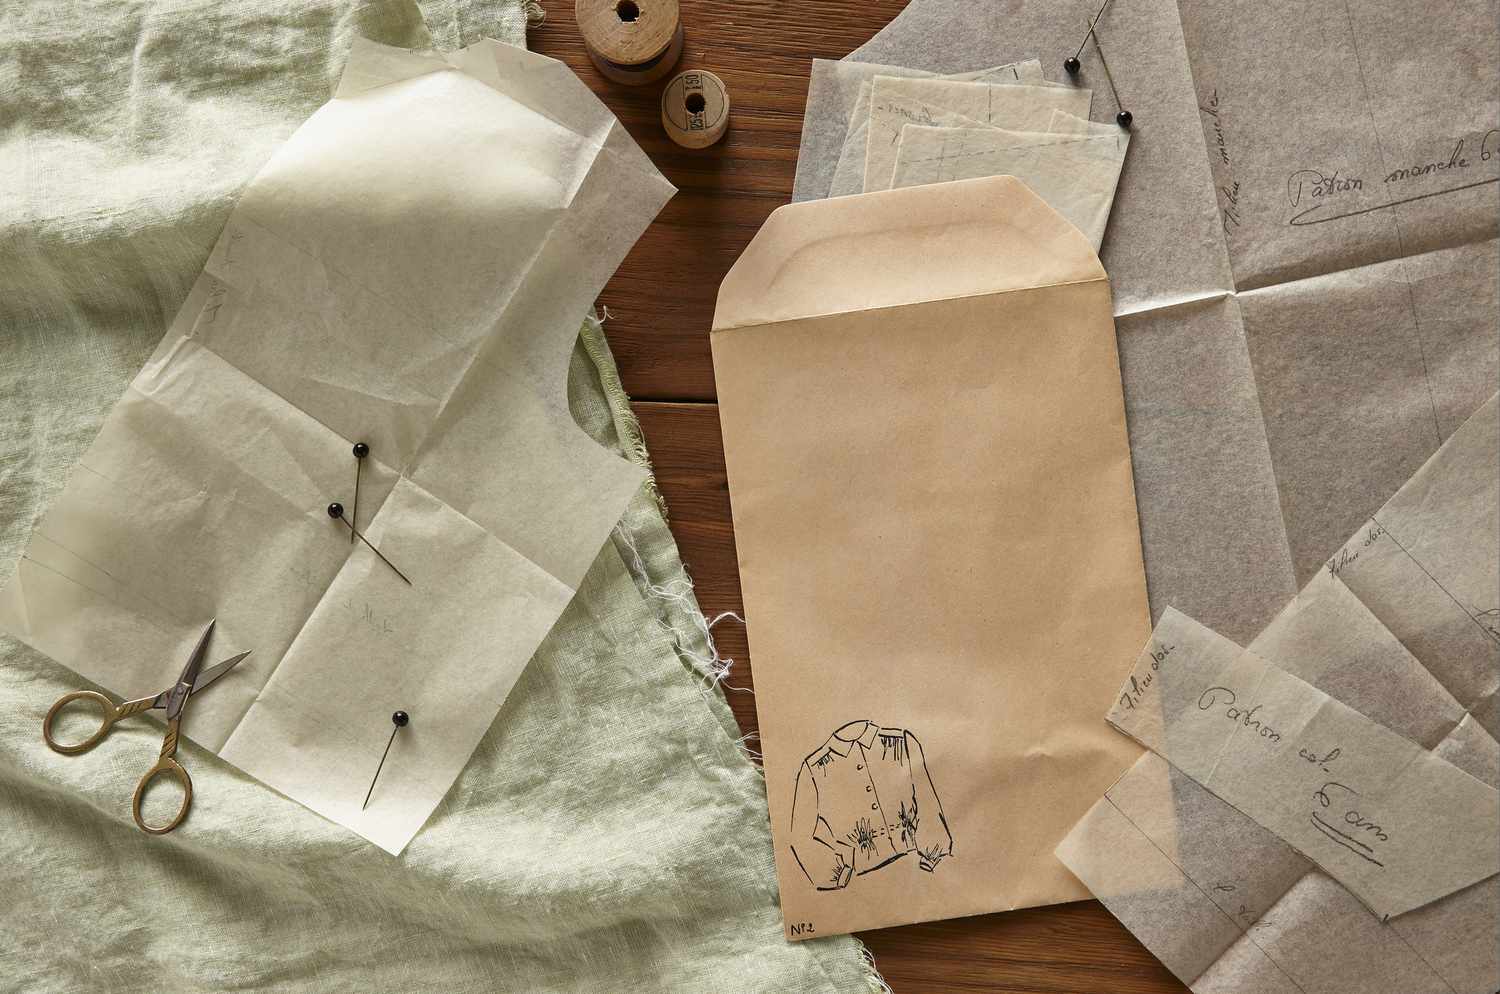 Blank envelope and clothing patterns